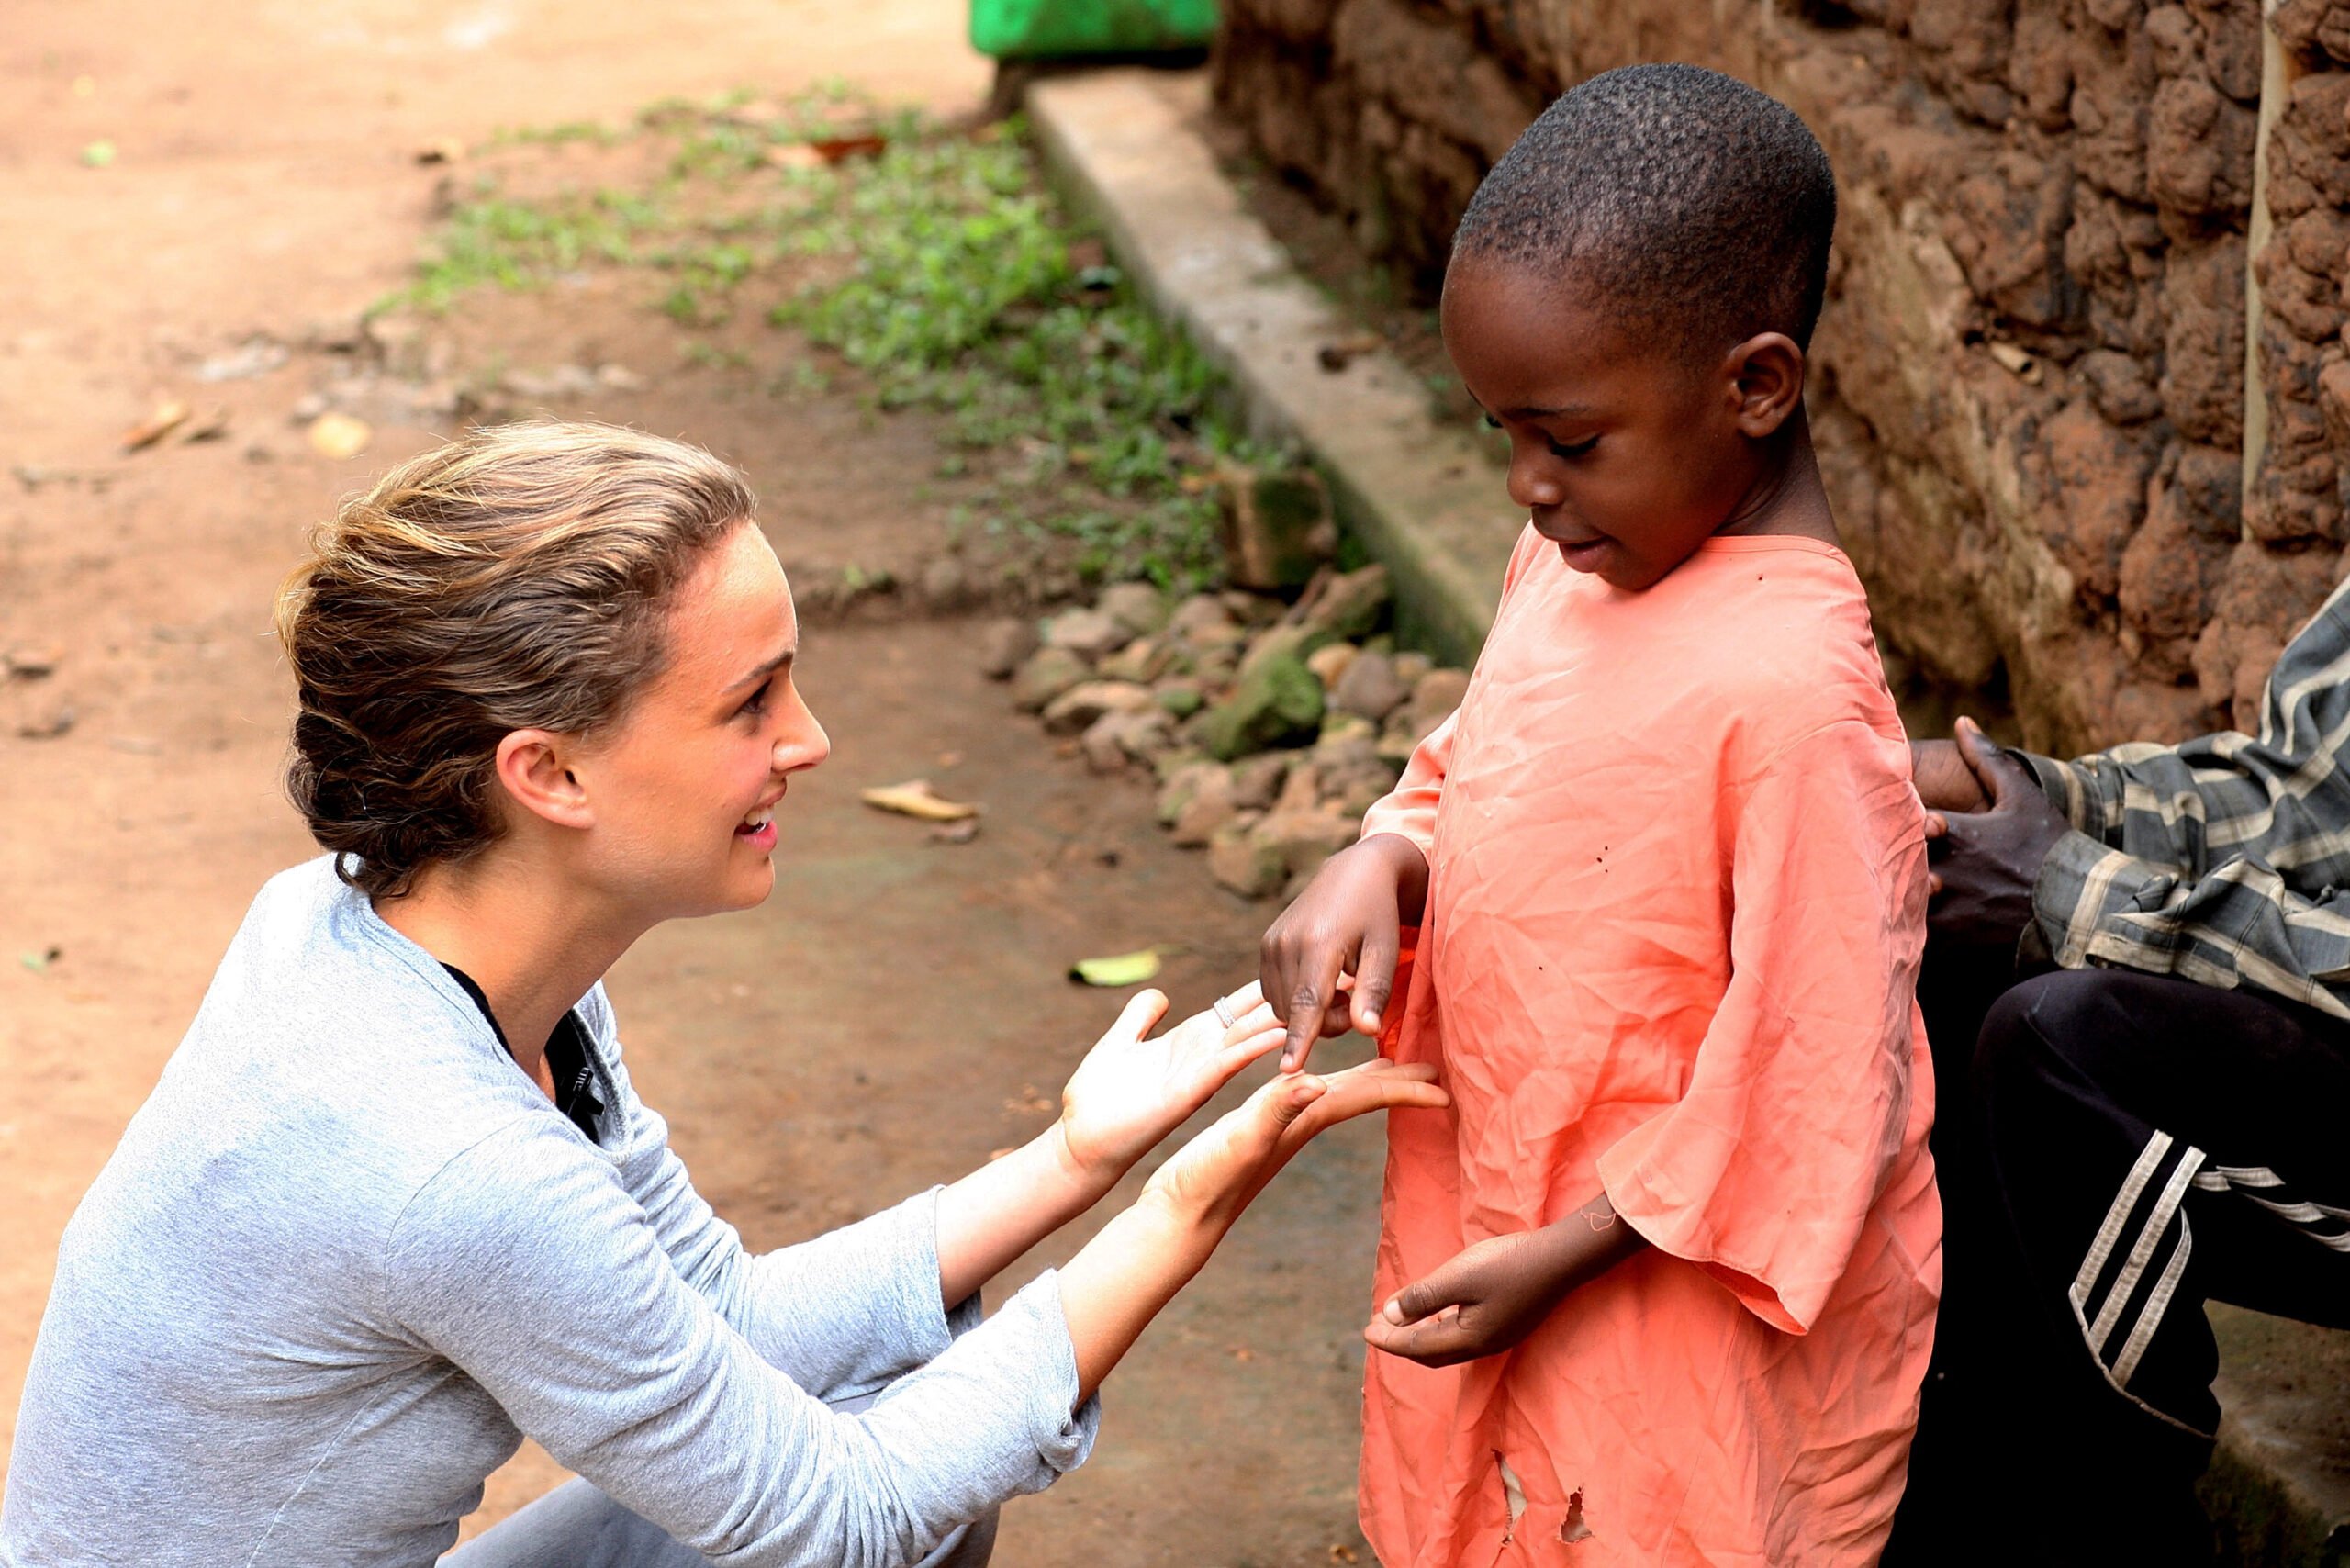 Natalie Portman on location in Kenya during the development of The Listen Campaign.